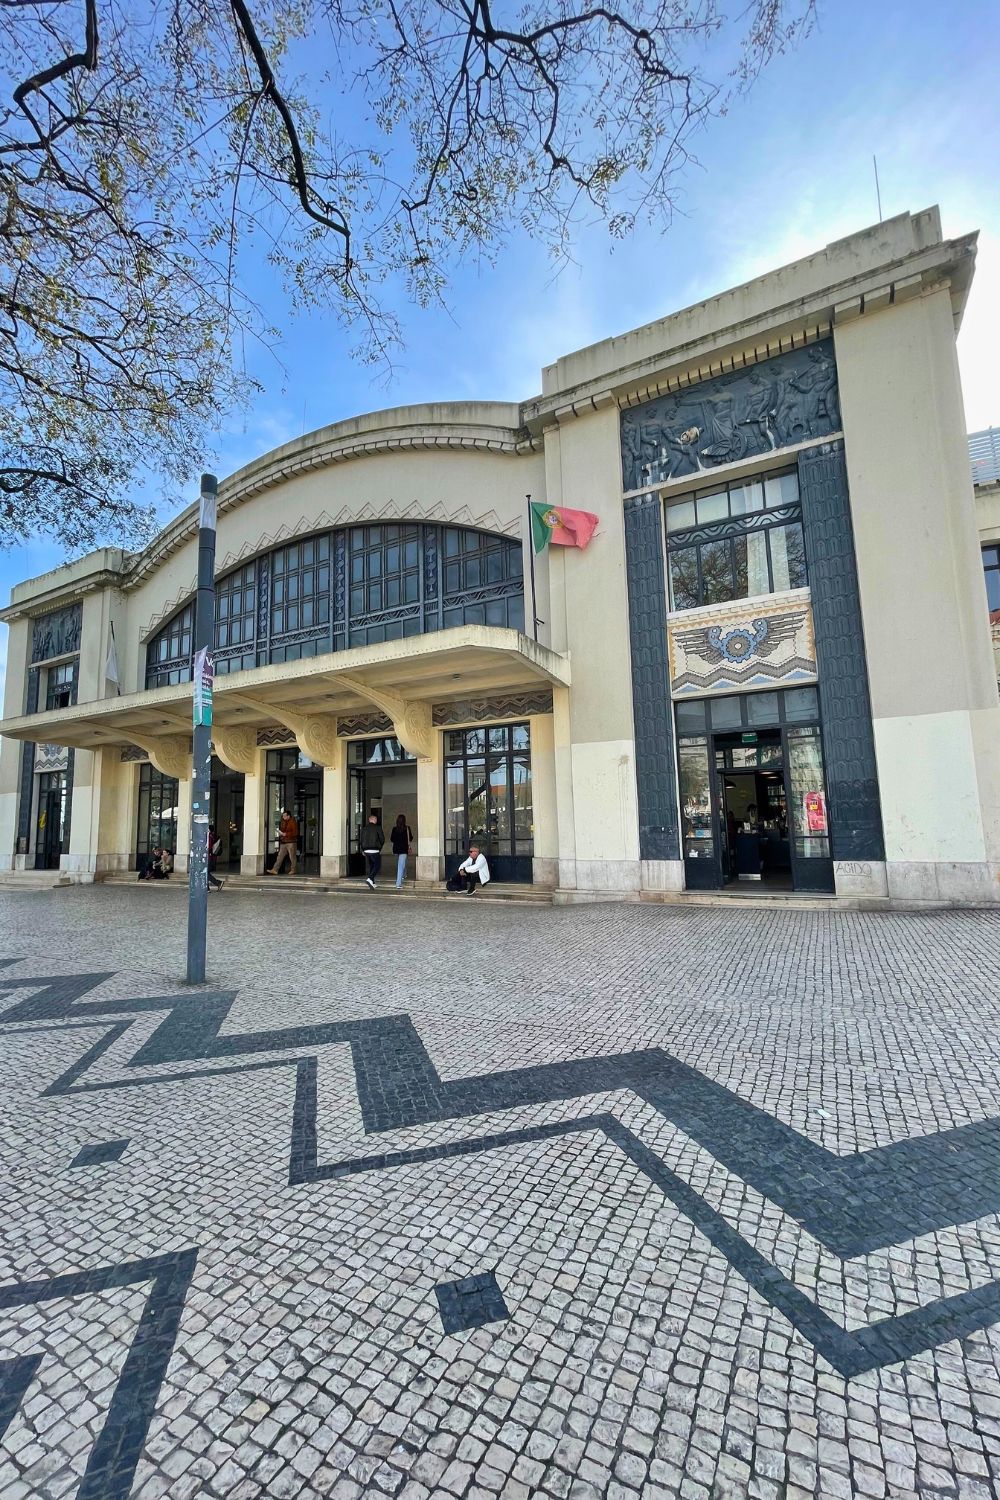 The façade of the Cascais train station presents a beautiful blend of traditional Portuguese architecture and modern functionality. The building, adorned with ornate azulejo tiles and an elegant arched entrance, sits under a soft sky, while the Portuguese flag flutters proudly above. The foreground features the distinctive calçada Portuguesa, a traditional-style cobblestone pavement creating a captivating geometric pattern.